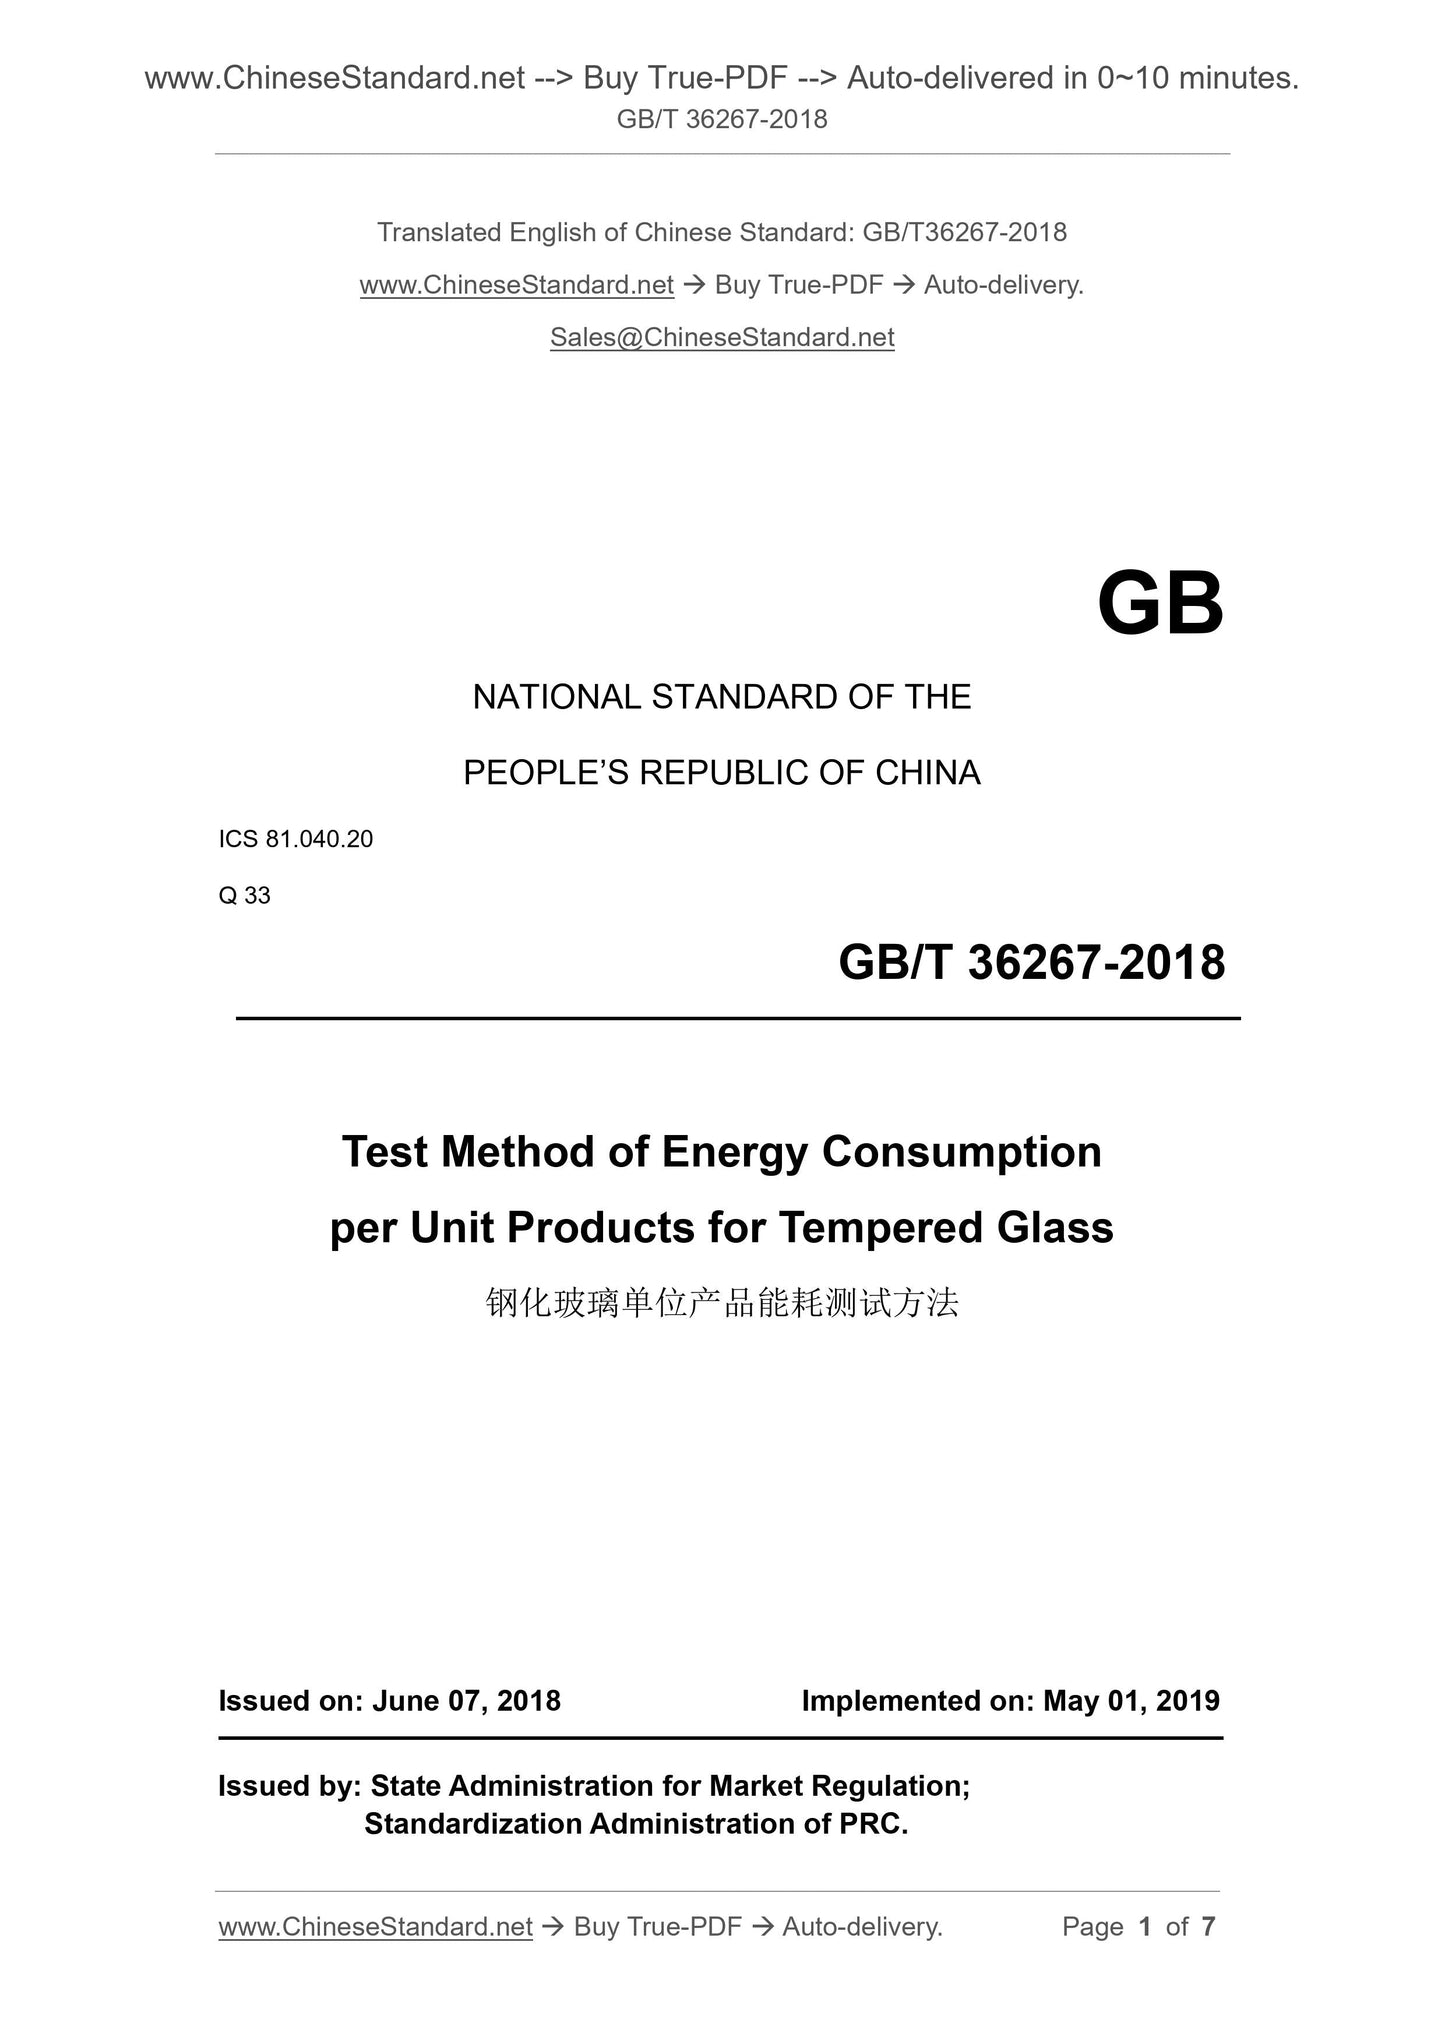 GB/T 36267-2018 Page 1